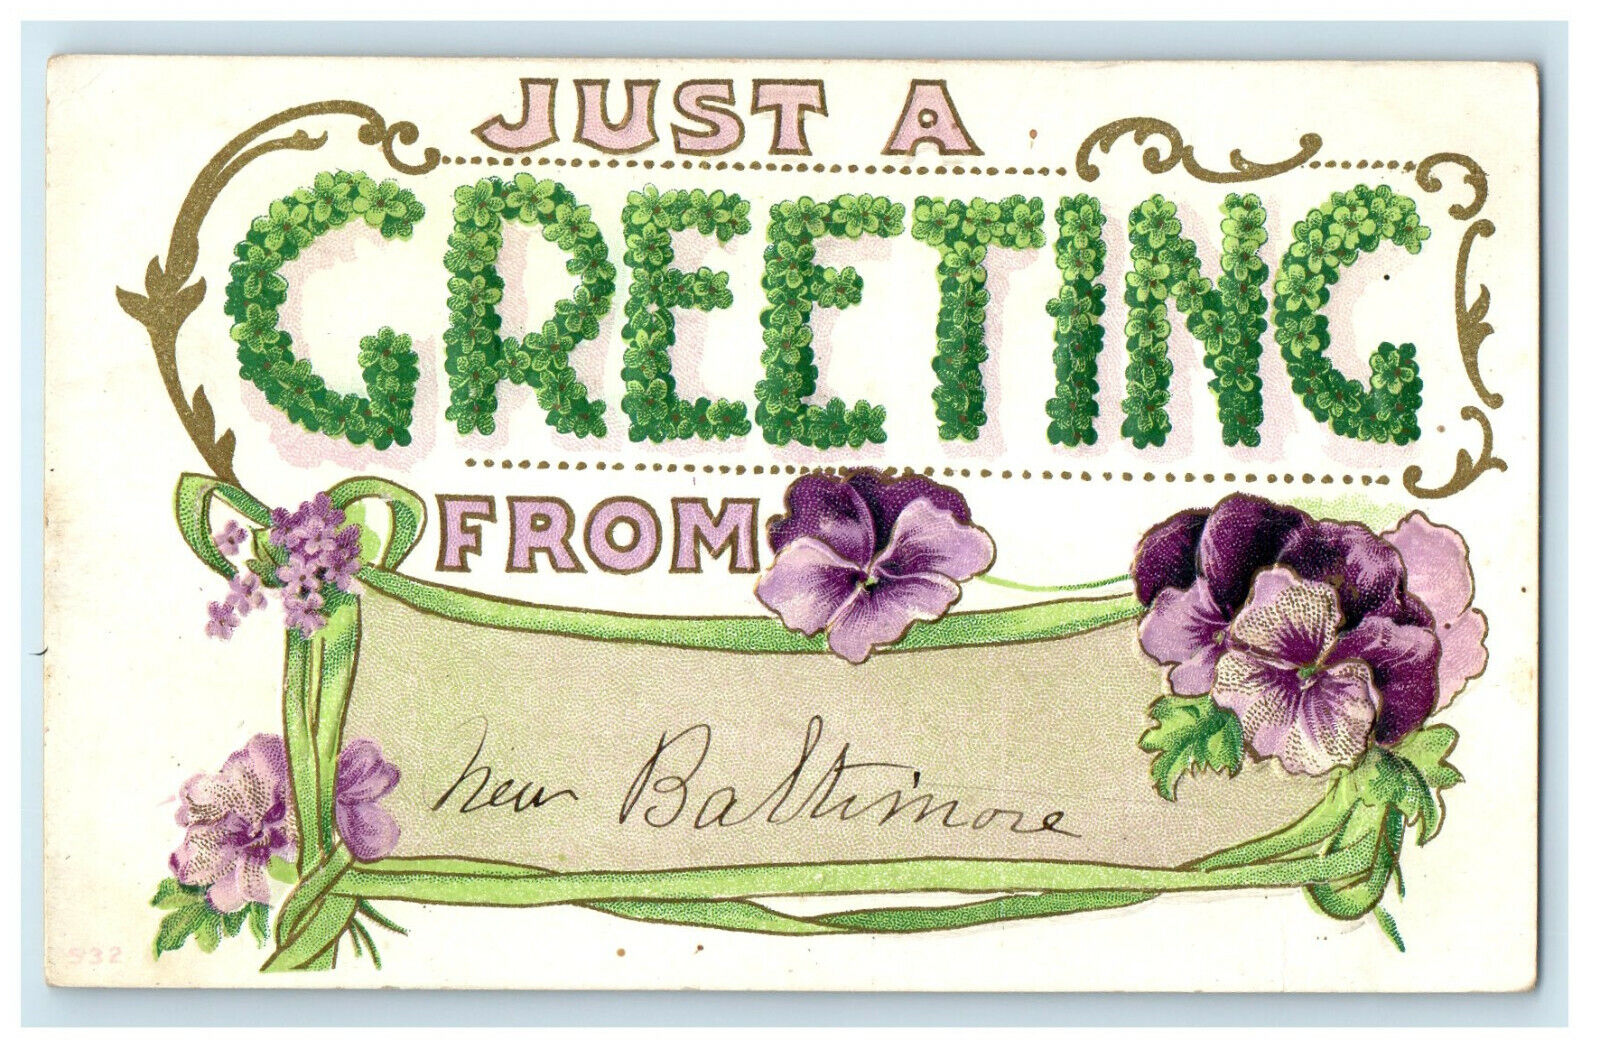 1911 Just A Greeting from New Baltimore Violet and Green Floral Postcard